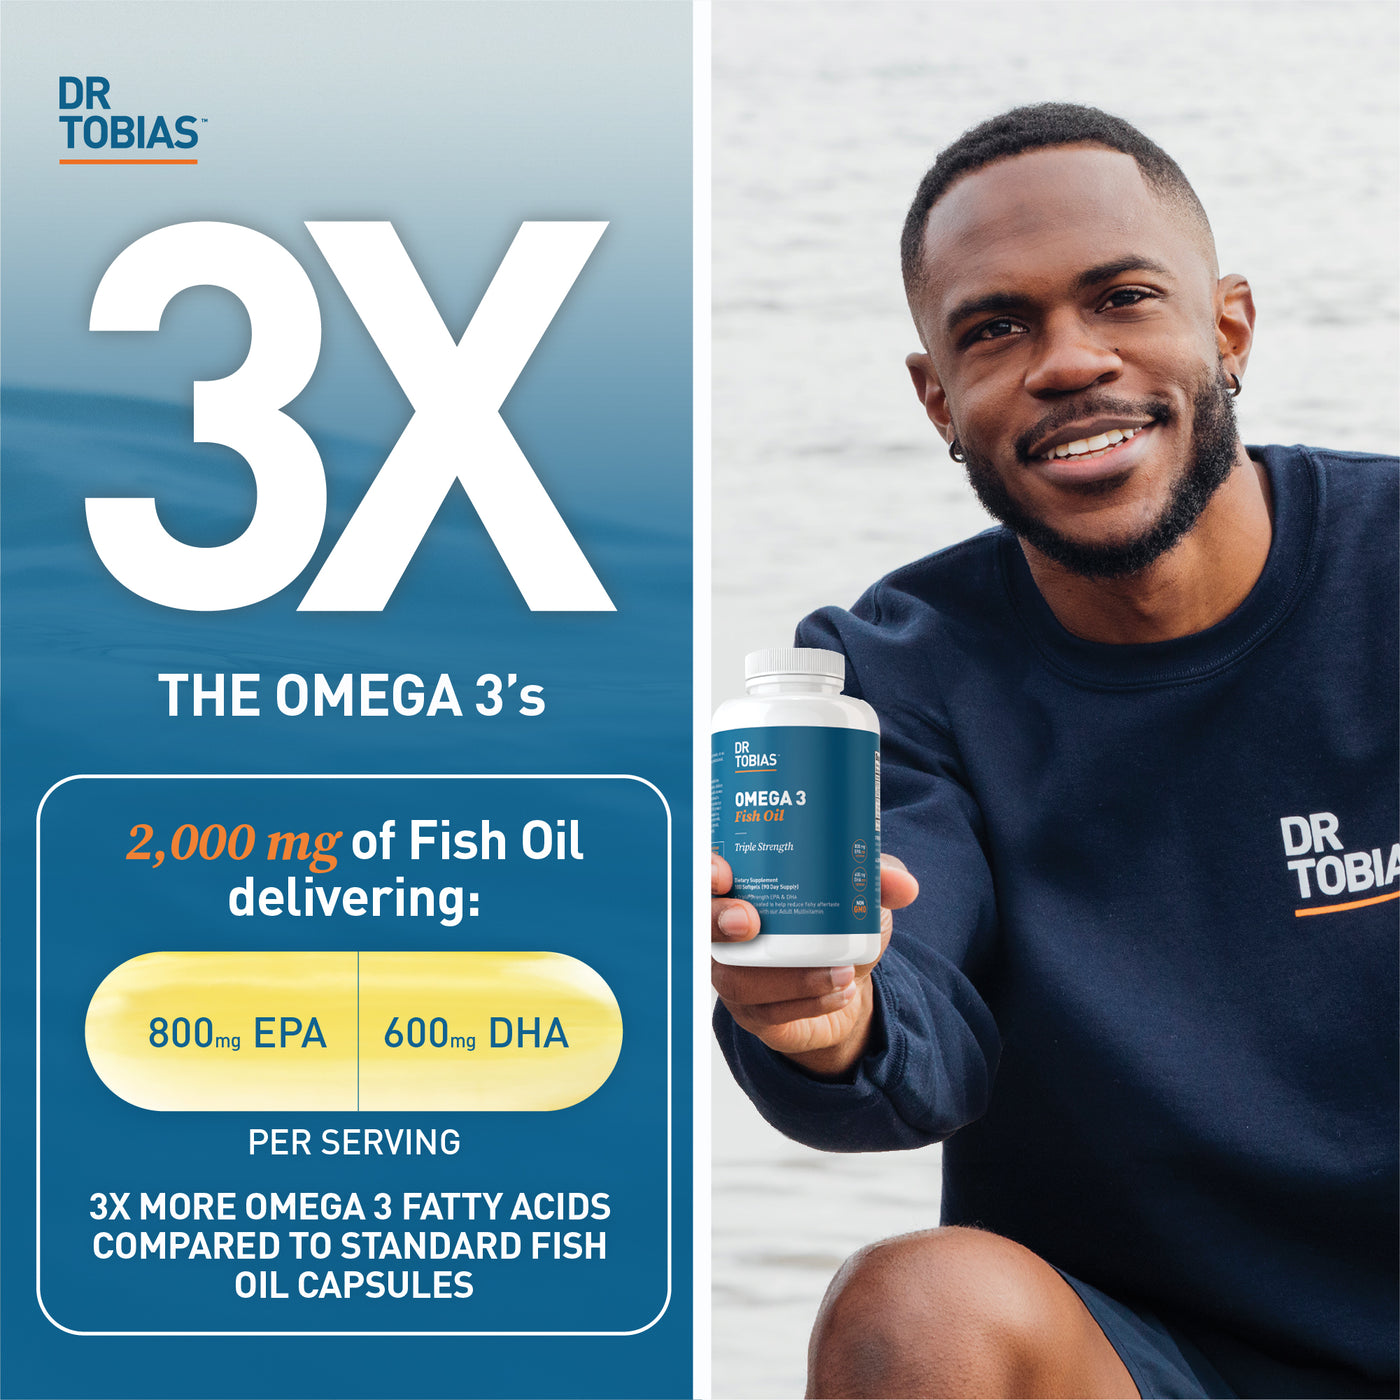 Dr Tobias' Optimum Omega-3 Fish Oil pills & #Win an iWatch!! ends 4/19 -  Mom Does Reviews